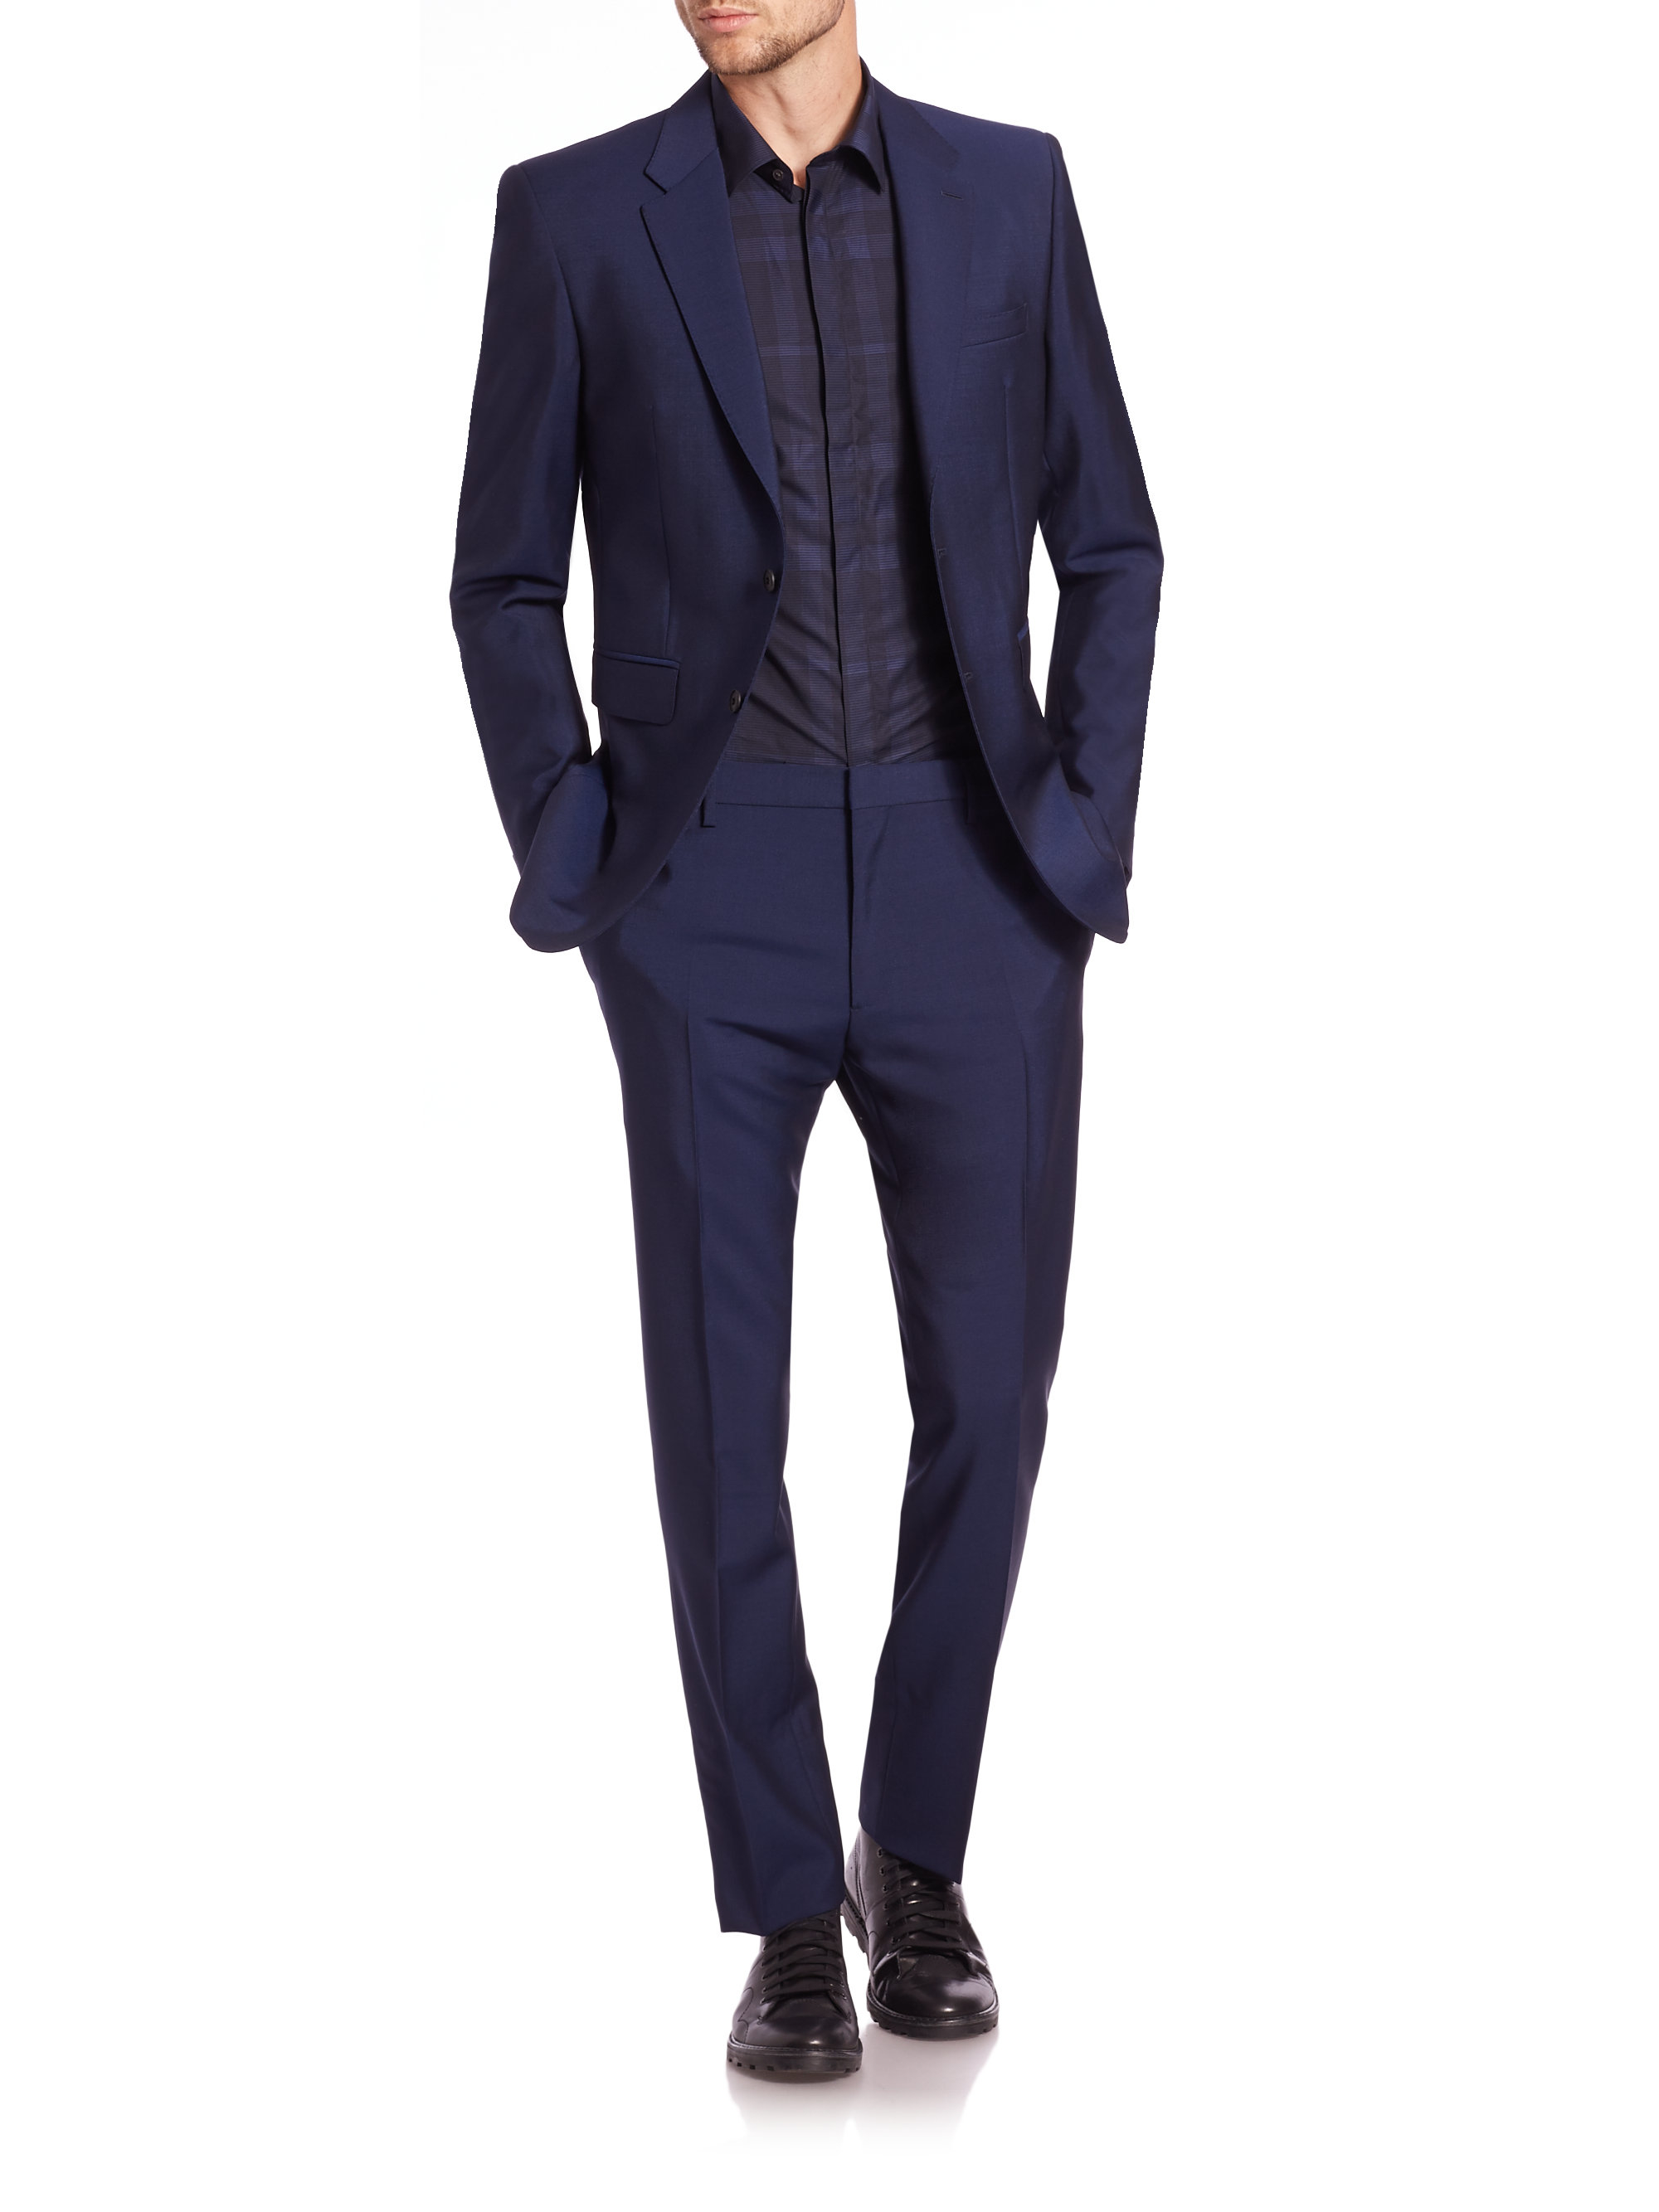 Lyst - Burberry Millbank Two-button Wool & Mohair Suit in Blue for Men